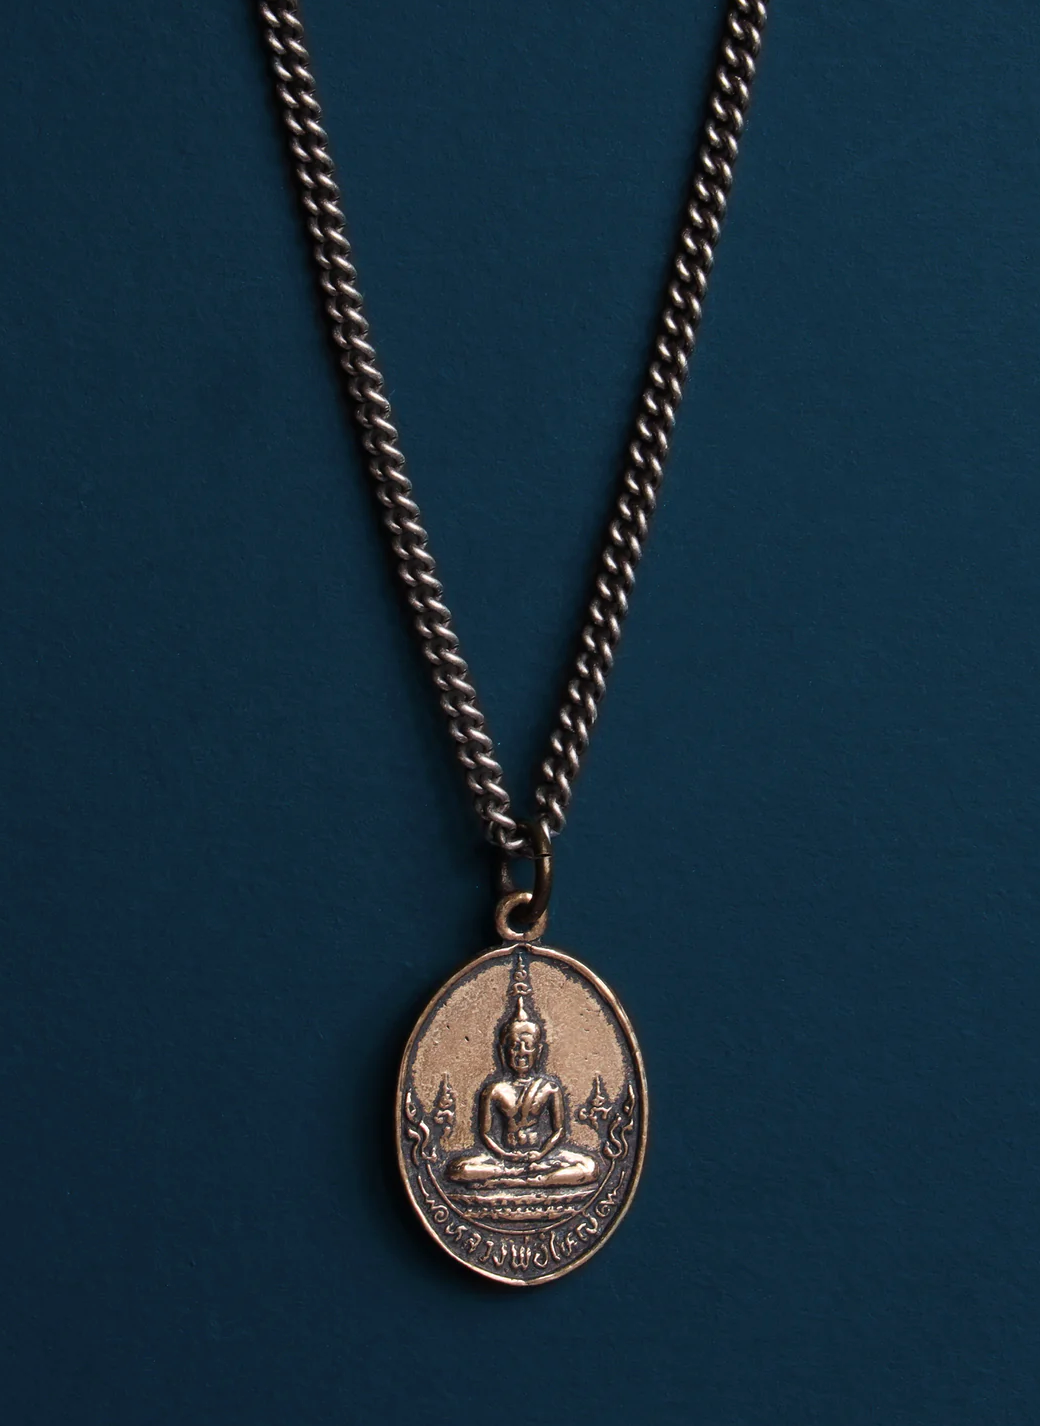 We are all Smith - Bronze Buddha Necklace